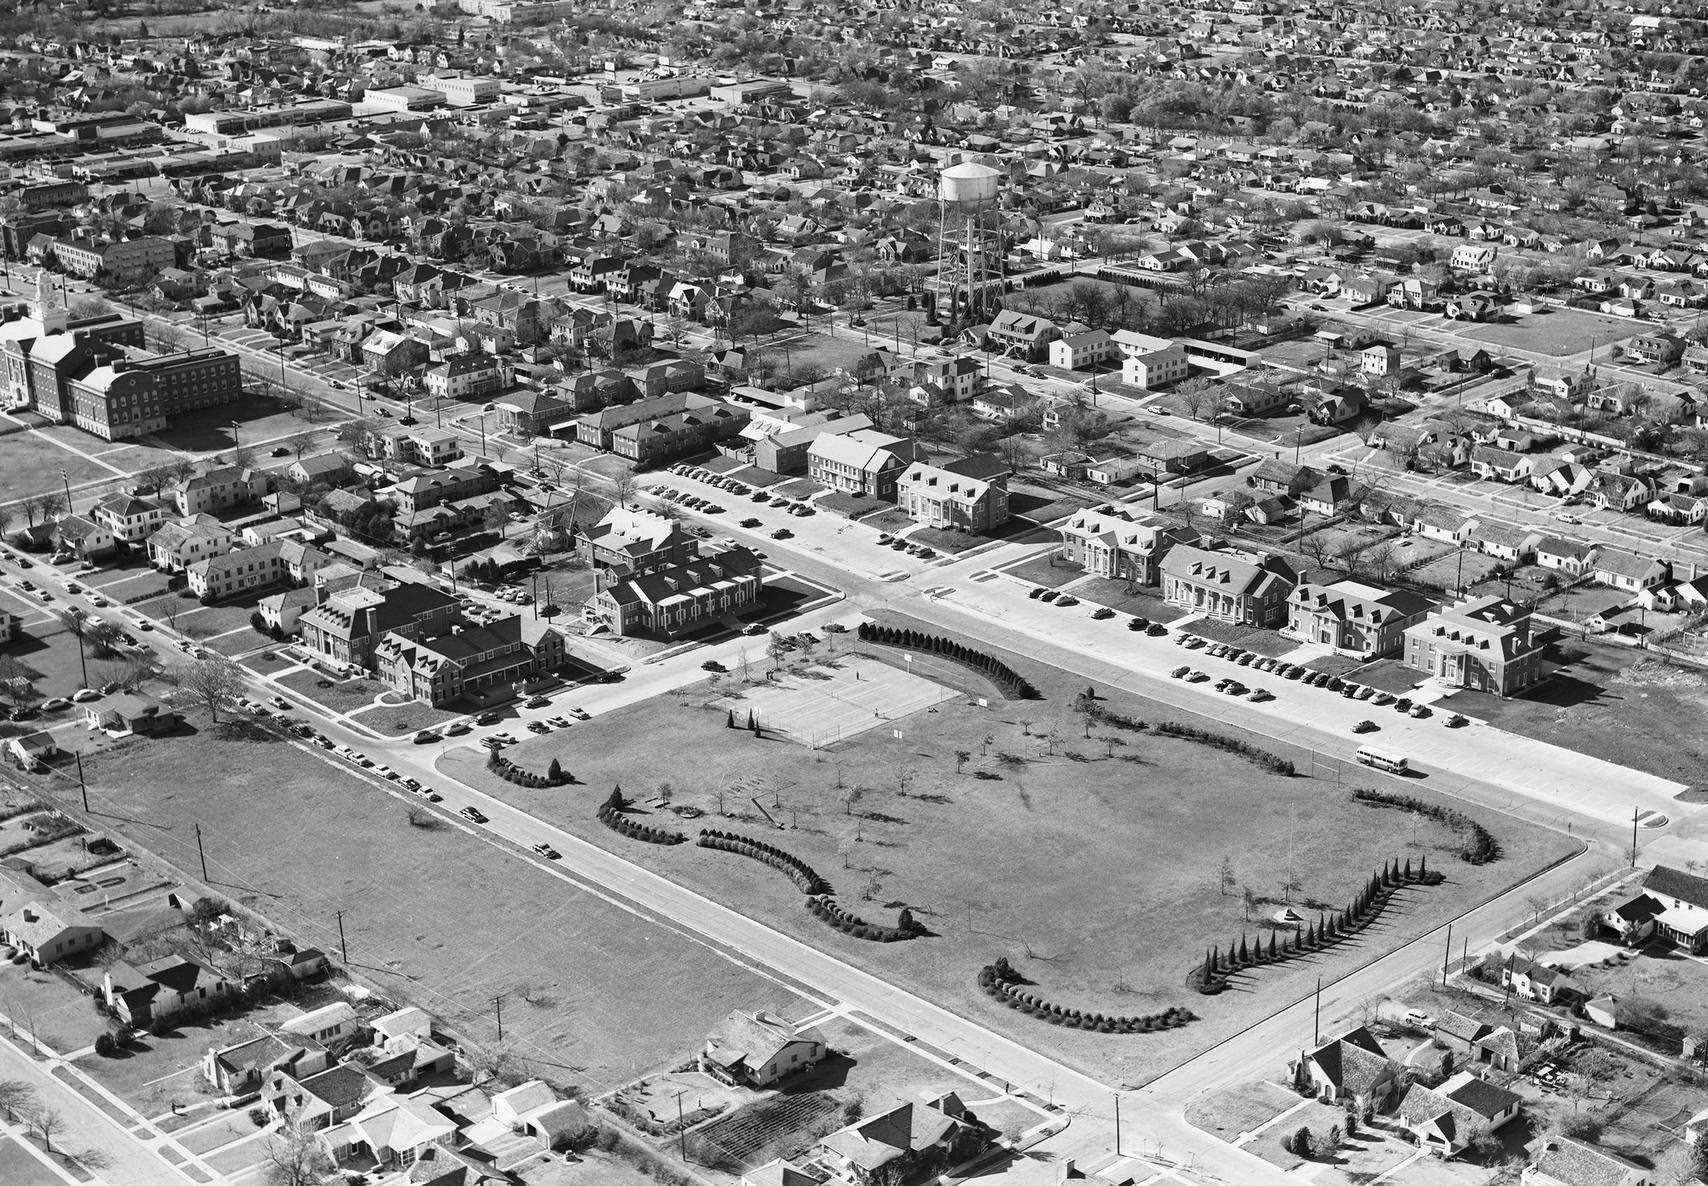 Aerial view of fraternity and sorority houses, Southern Methodist University, Dallas, 1952